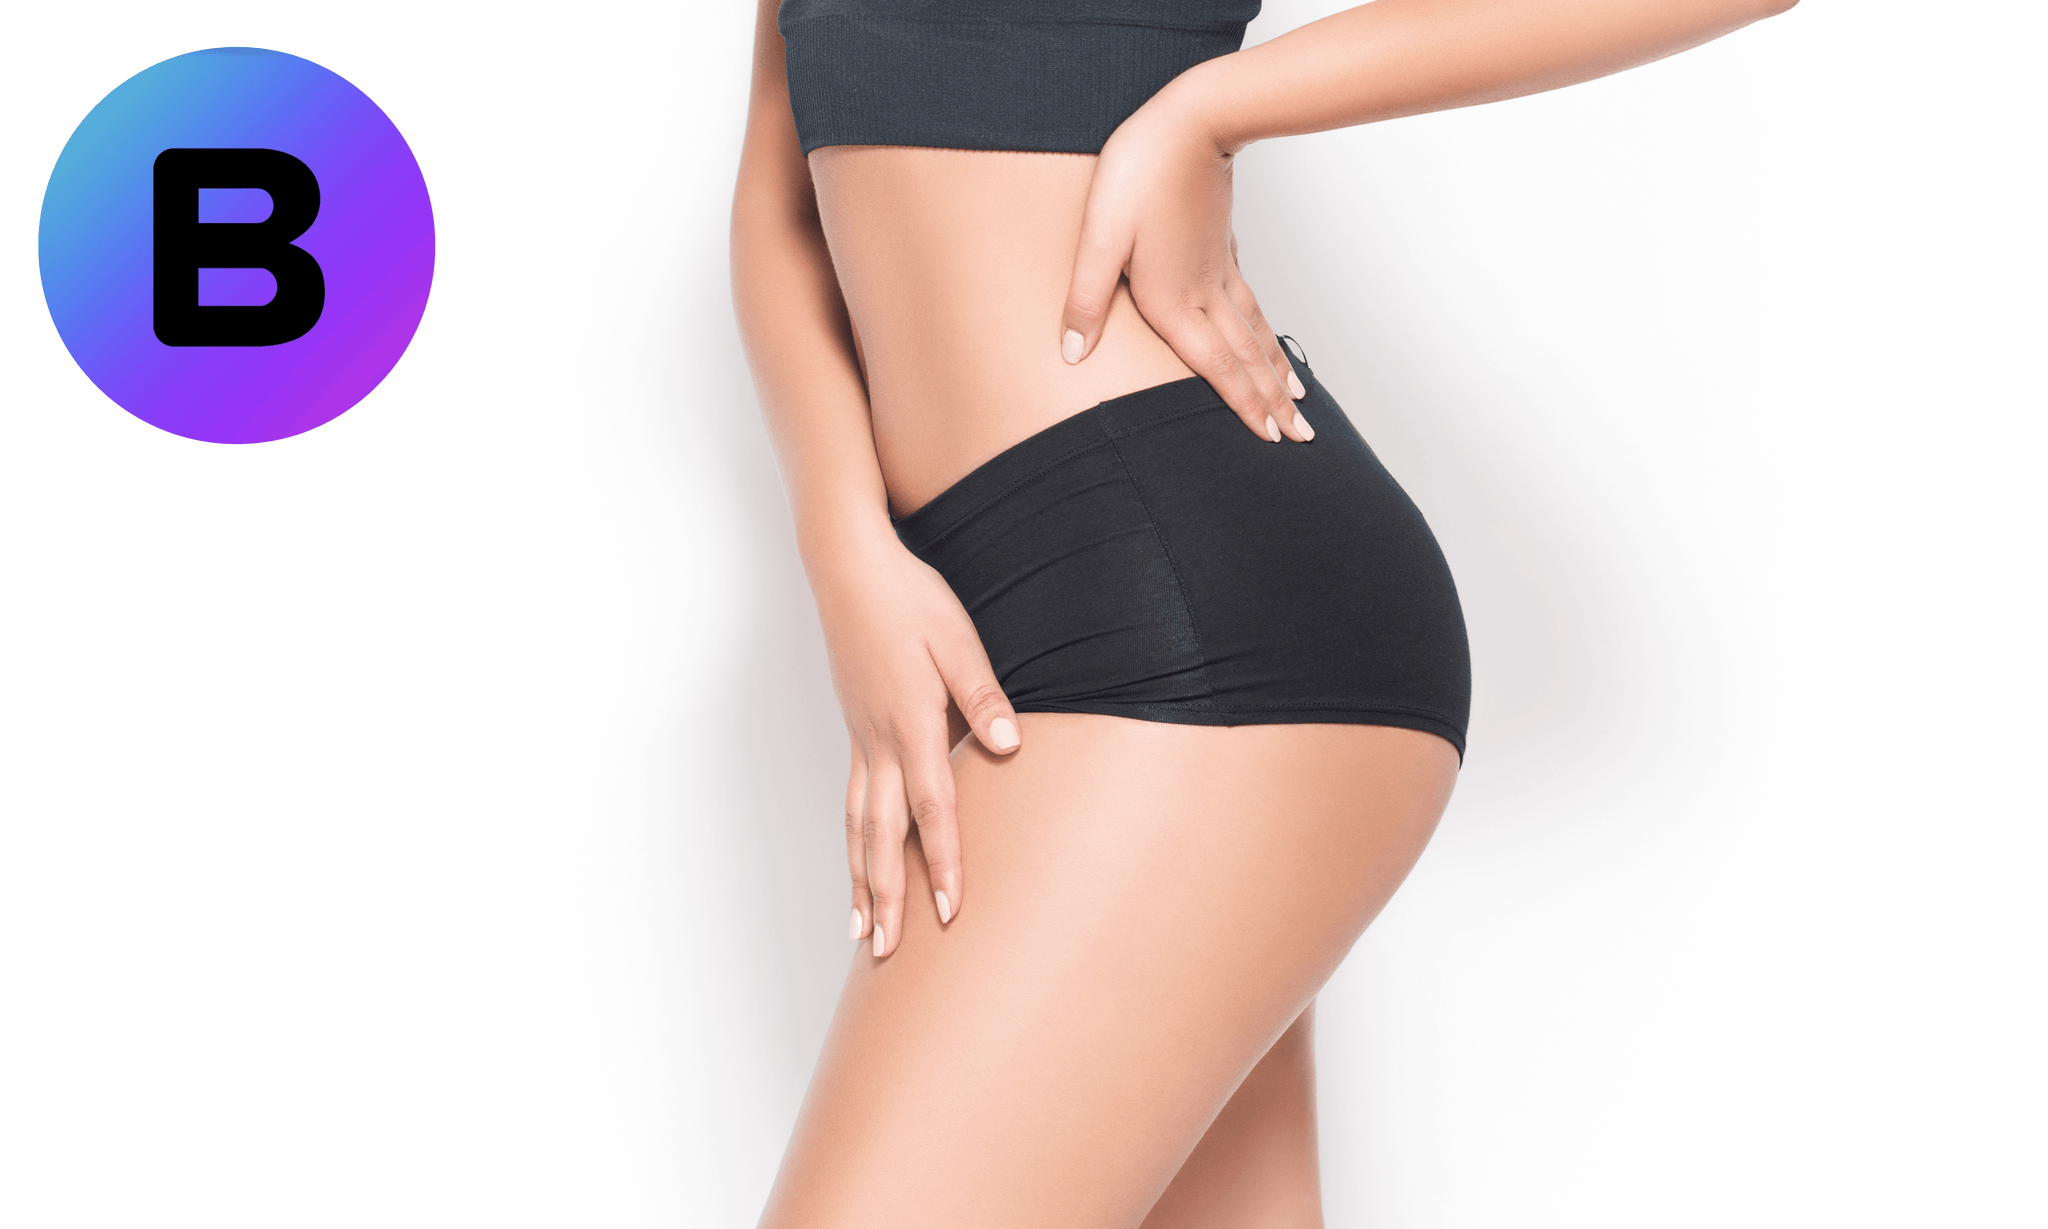 Here’s Why You Have Cellulite - and How To Get Rid of It